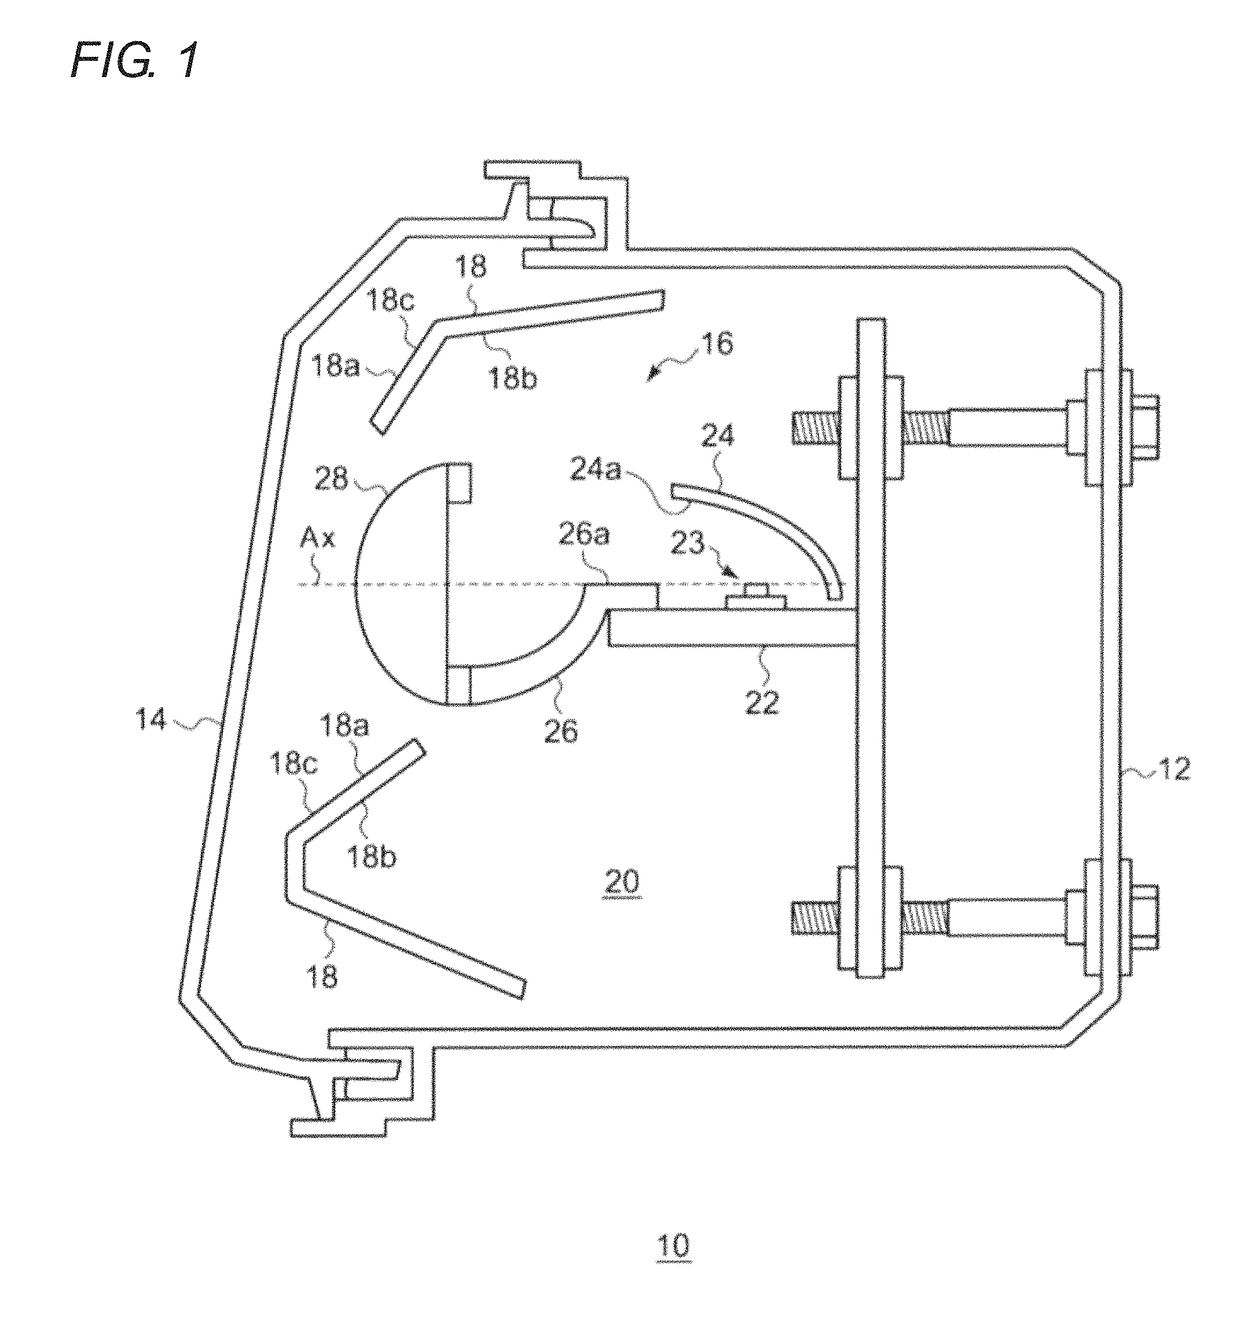 Resin molded component and method for manufacturing resin molded component